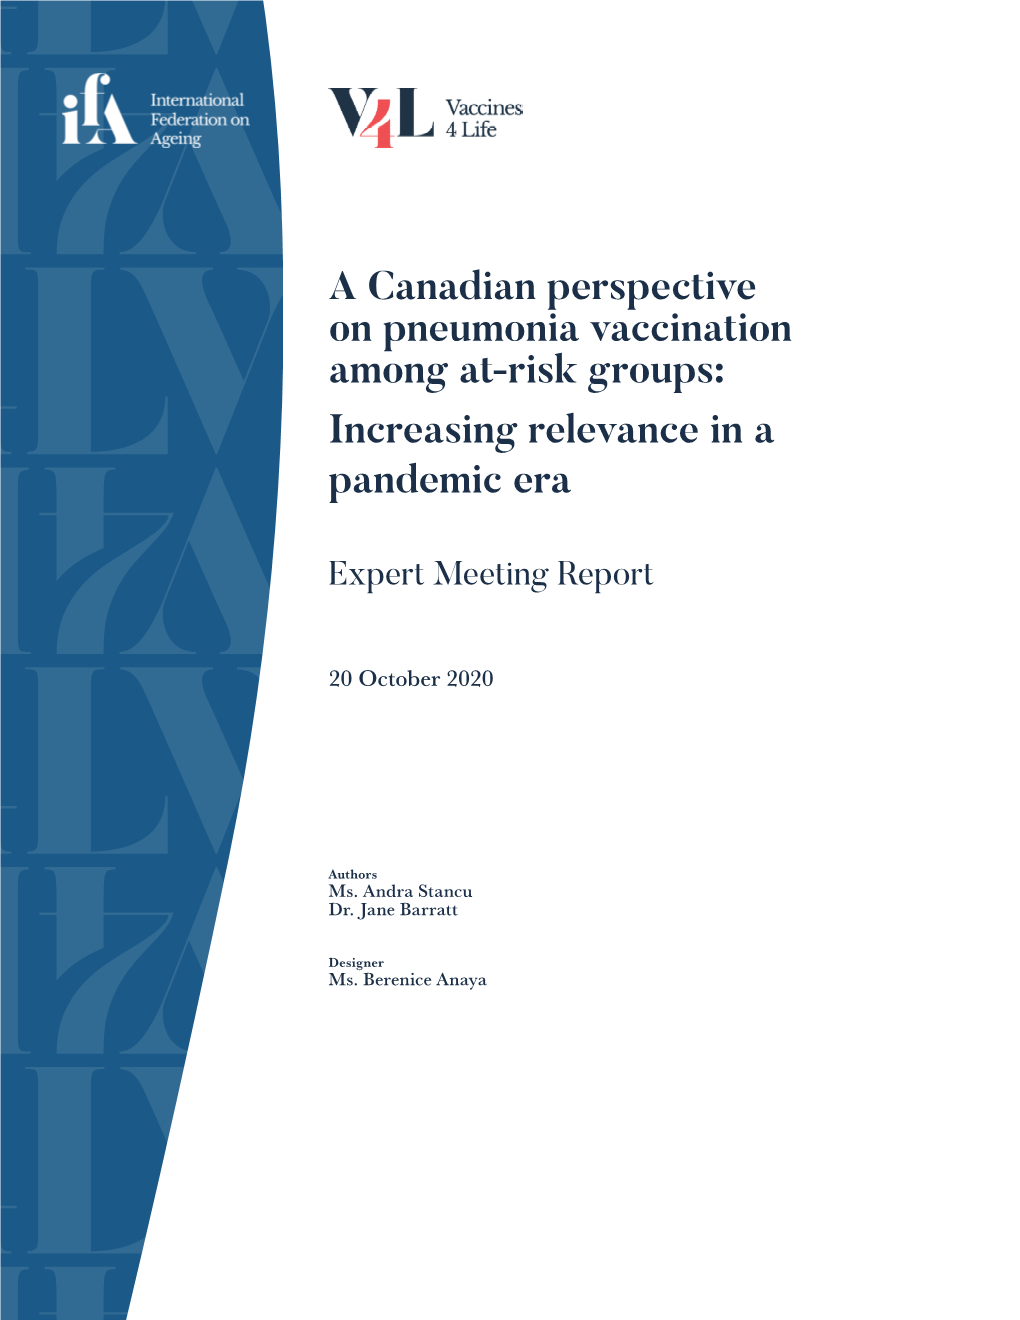 A Canadian Perspective on Pneumonia Vaccination Among At-Risk Groups: Increasing Relevance in a Pandemic Era